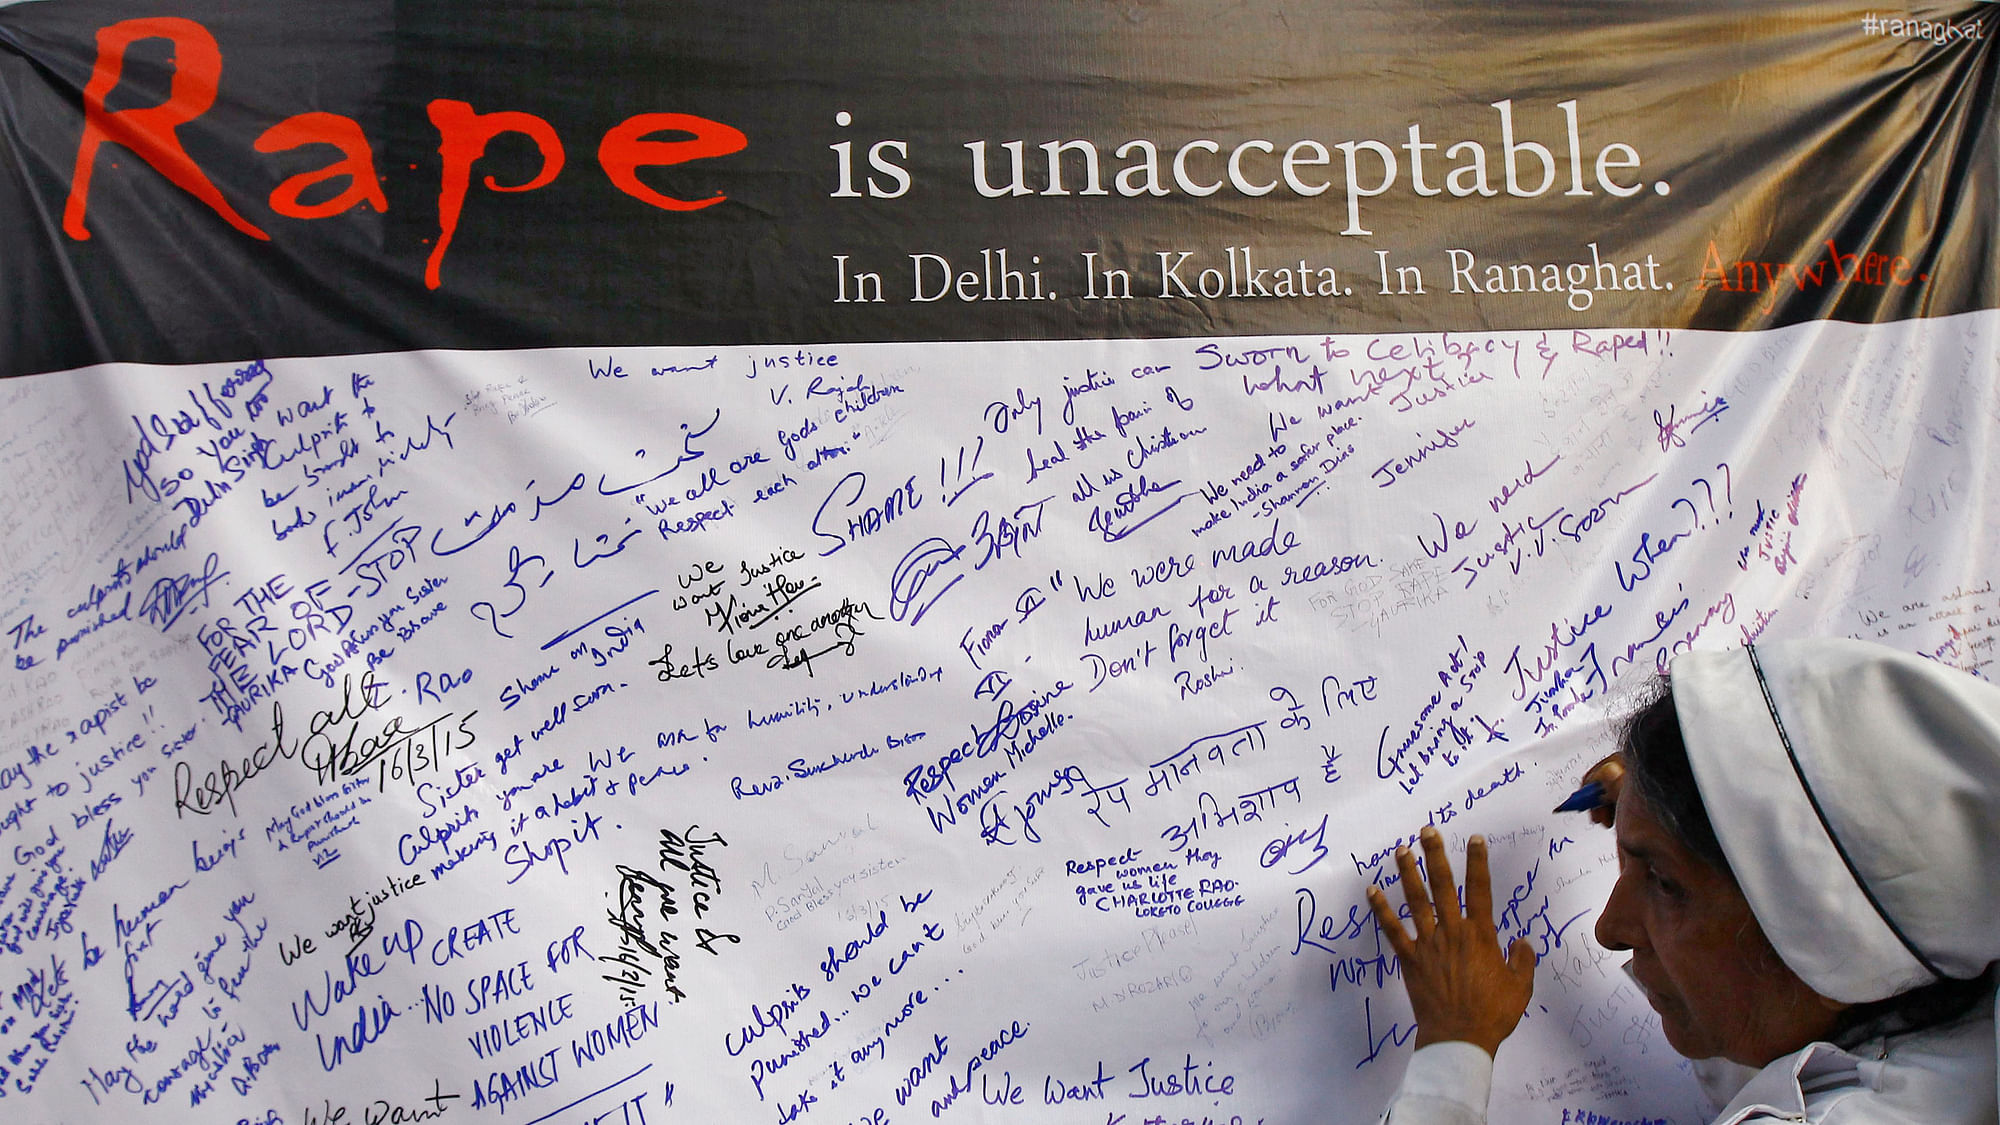 Signatures on an anti-rape banner. Image used for representational purposes.